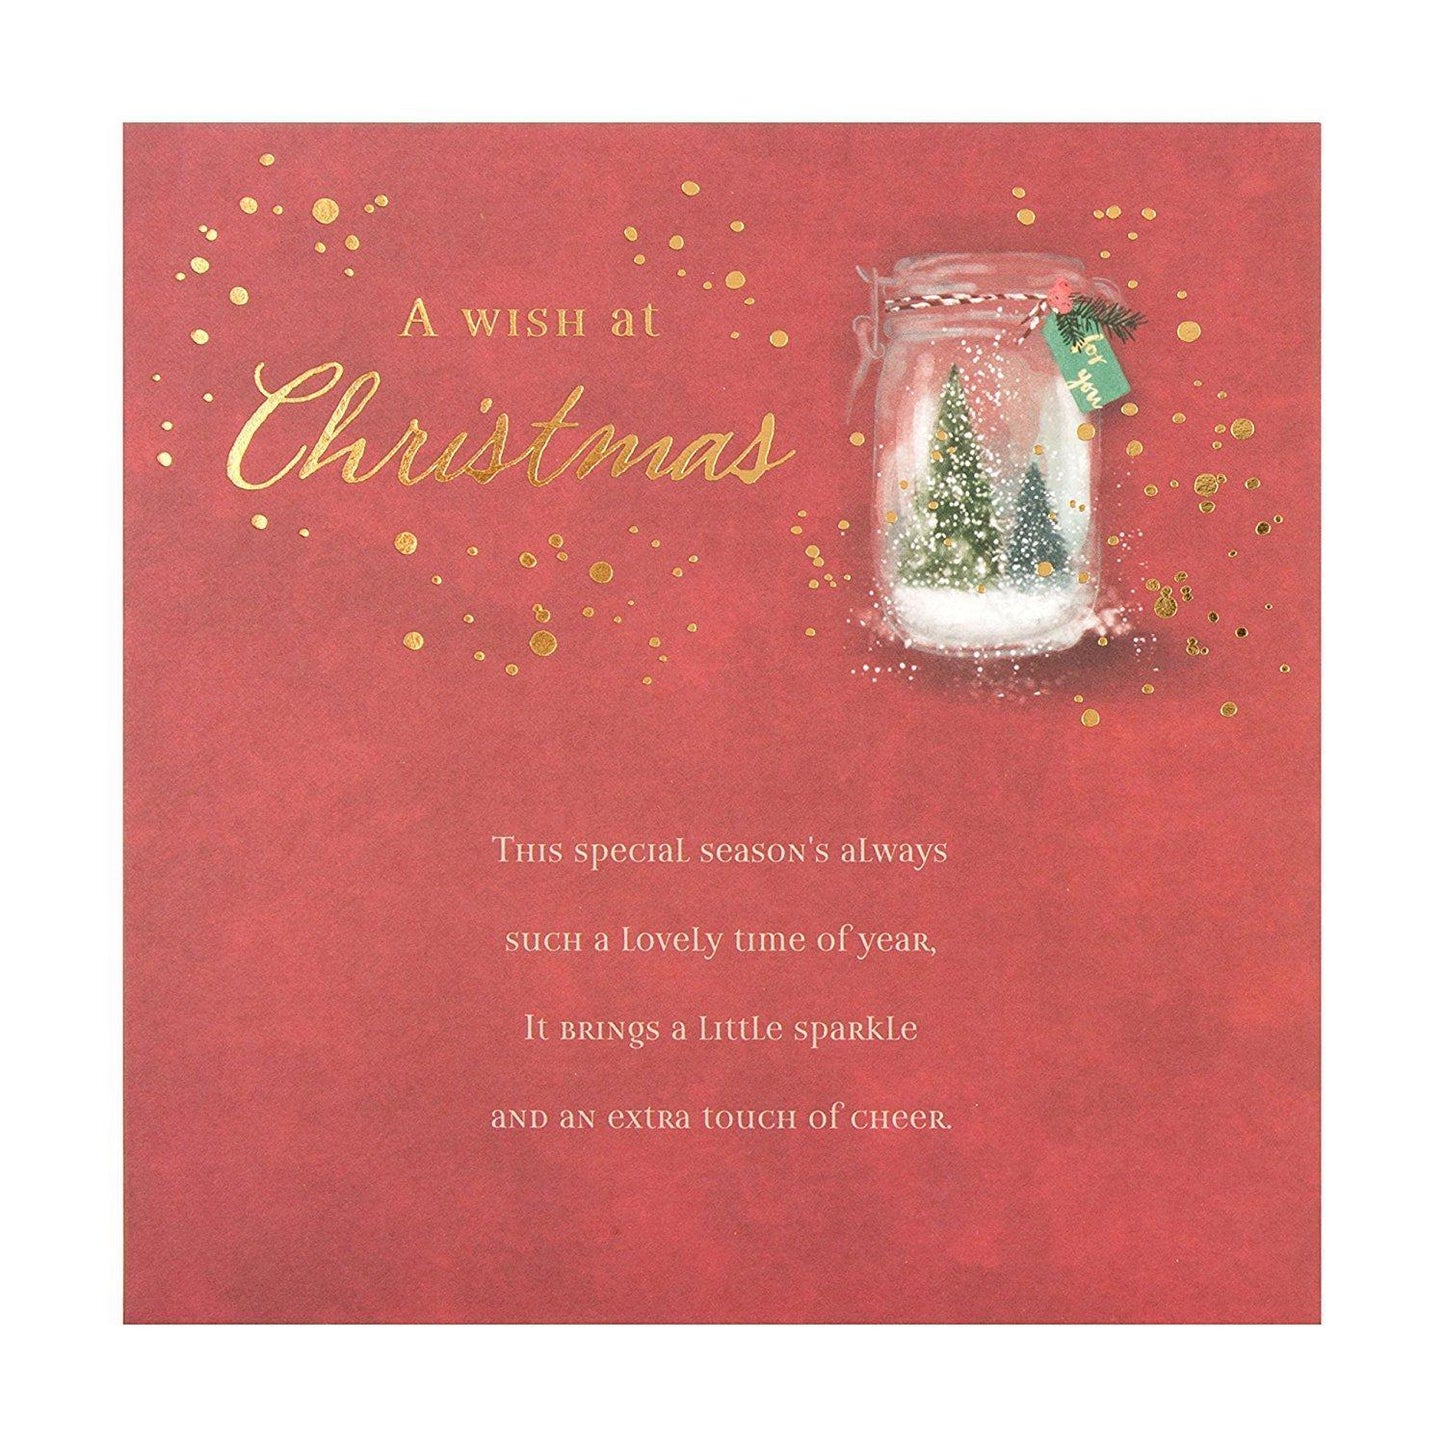 Hallmark Christmas Charity Card Pack "A Wish" - Pack of 10 